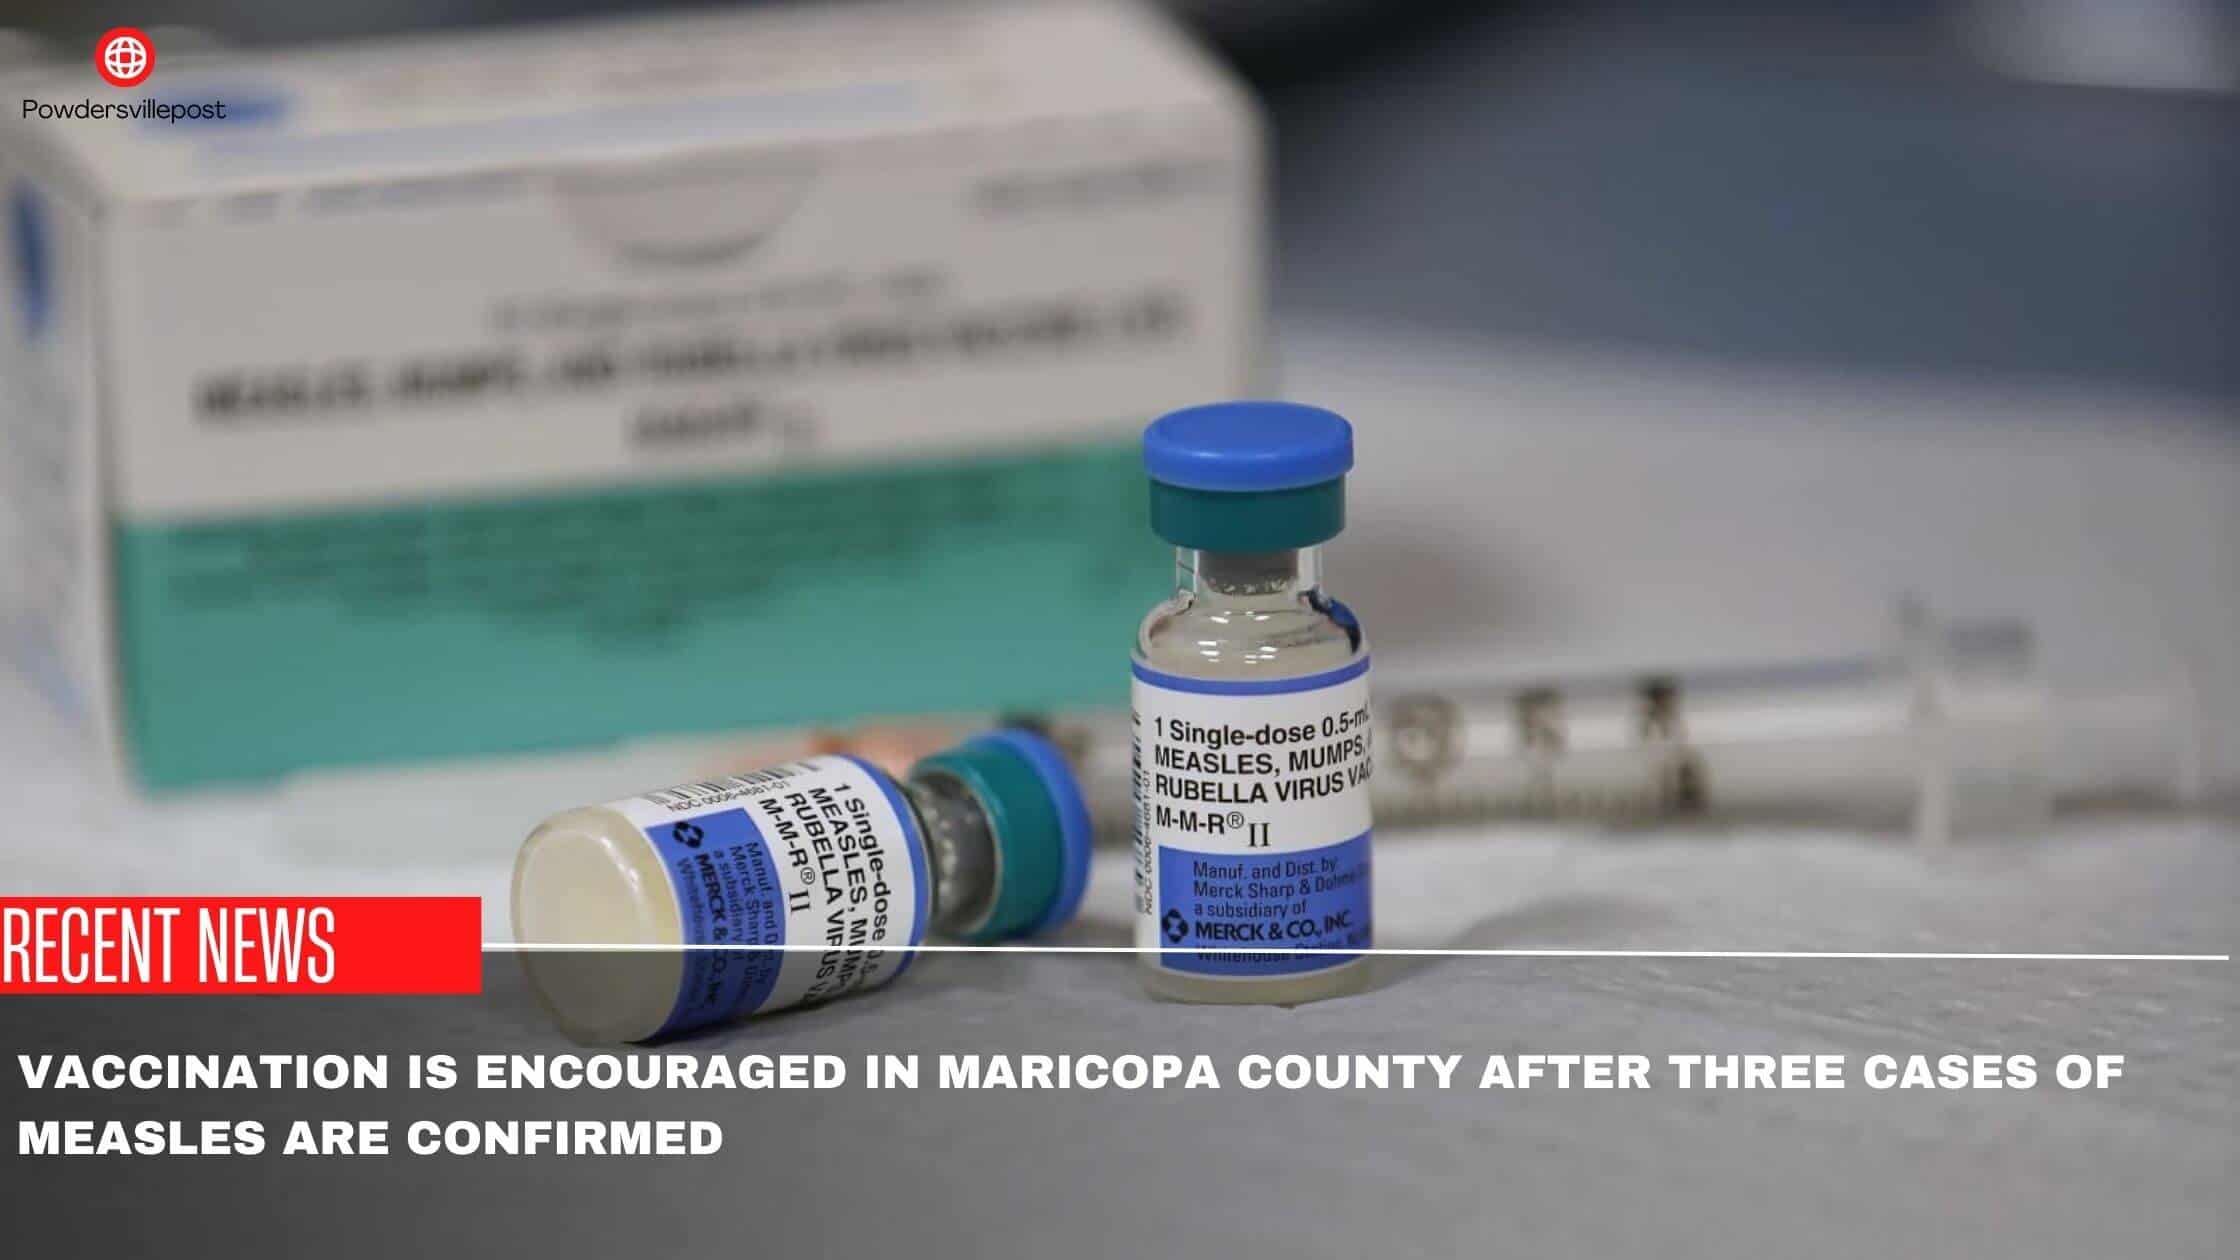 Vaccination Is Encouraged In Maricopa County After 3 Cases Of Measles Are Confirmed